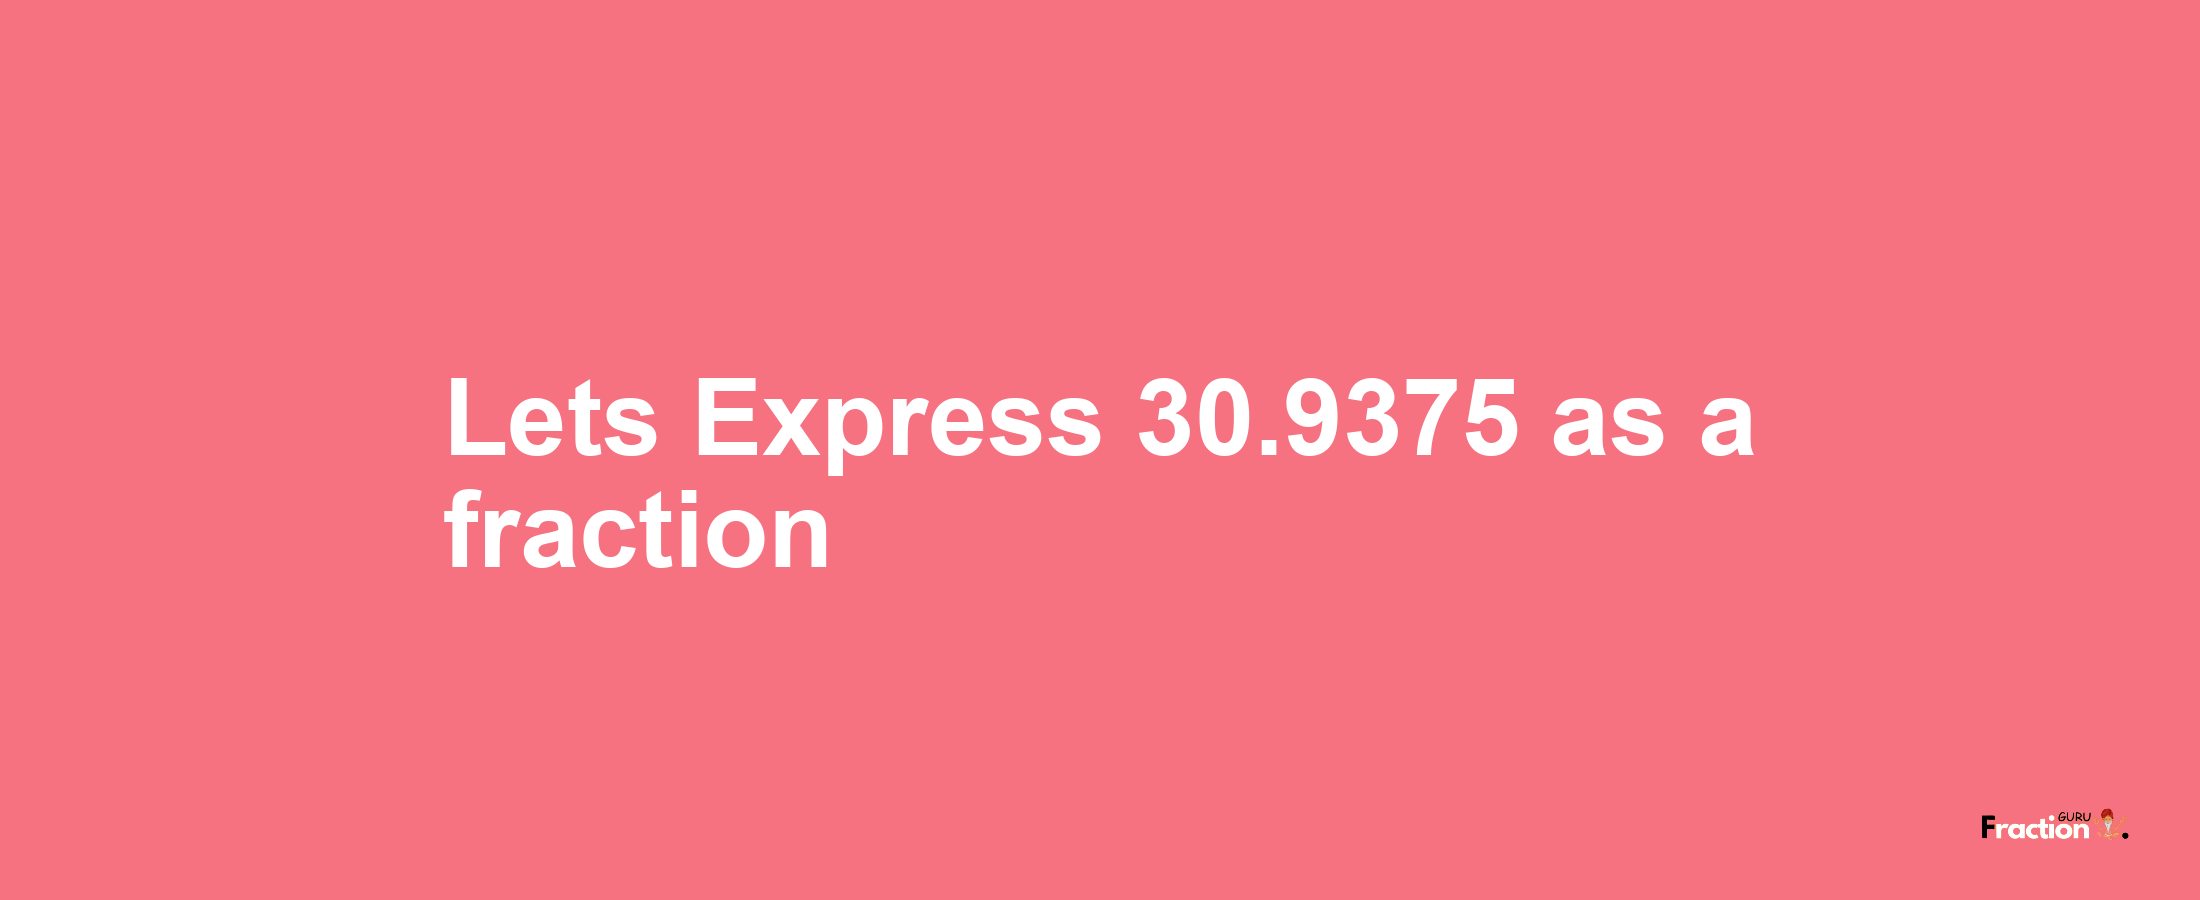 Lets Express 30.9375 as afraction